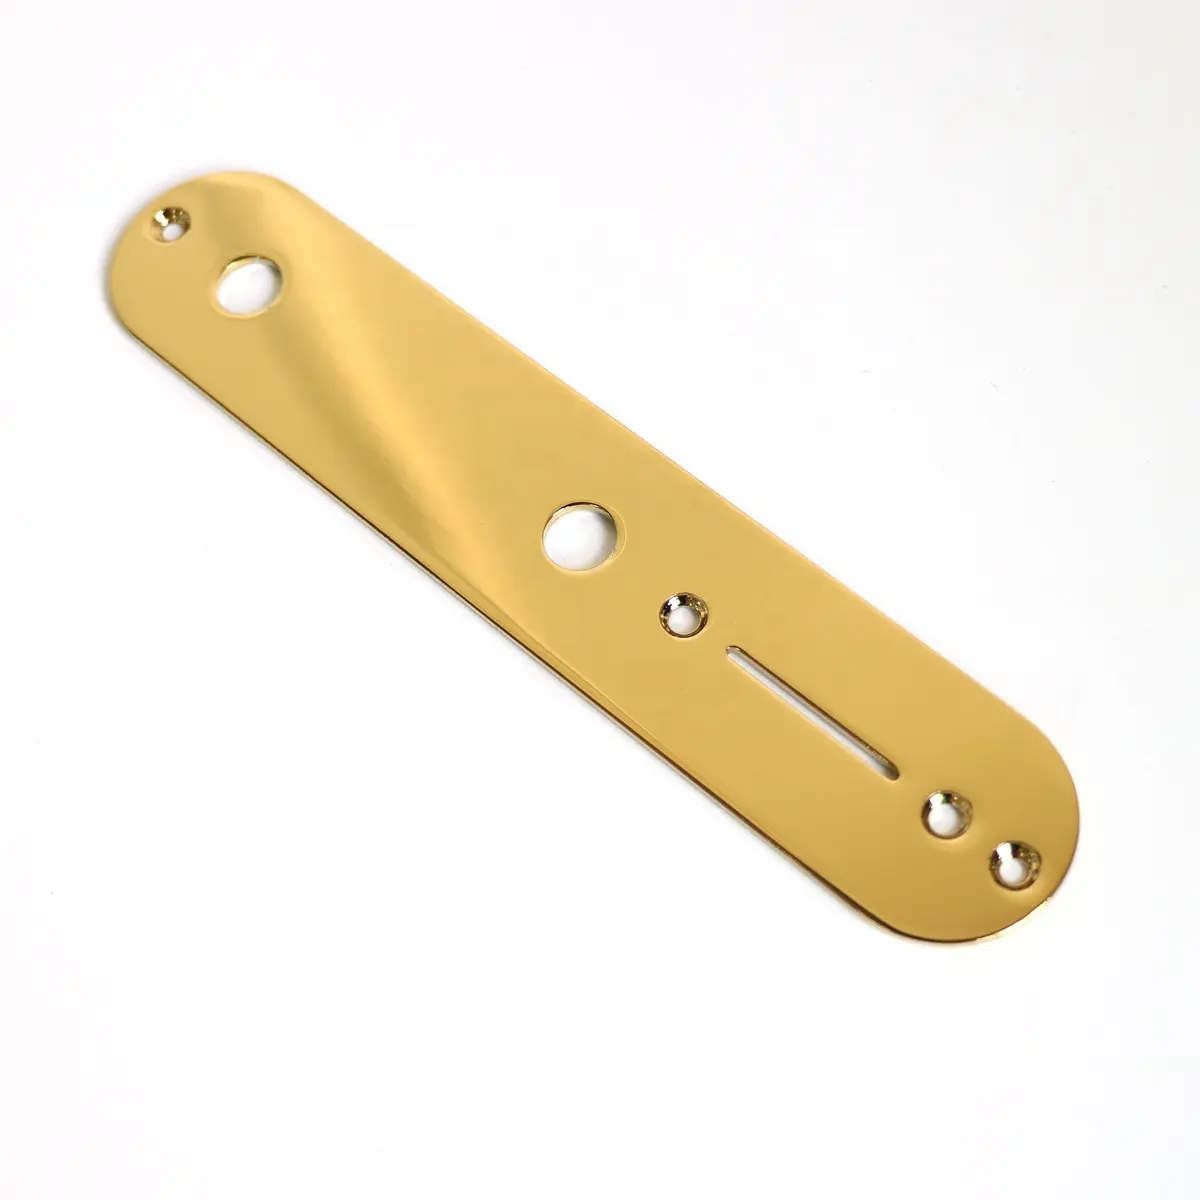 Donlis 32cm Gold Color TL Guitar Control Plate for TL Electric Guitar Cavity Cover with screws